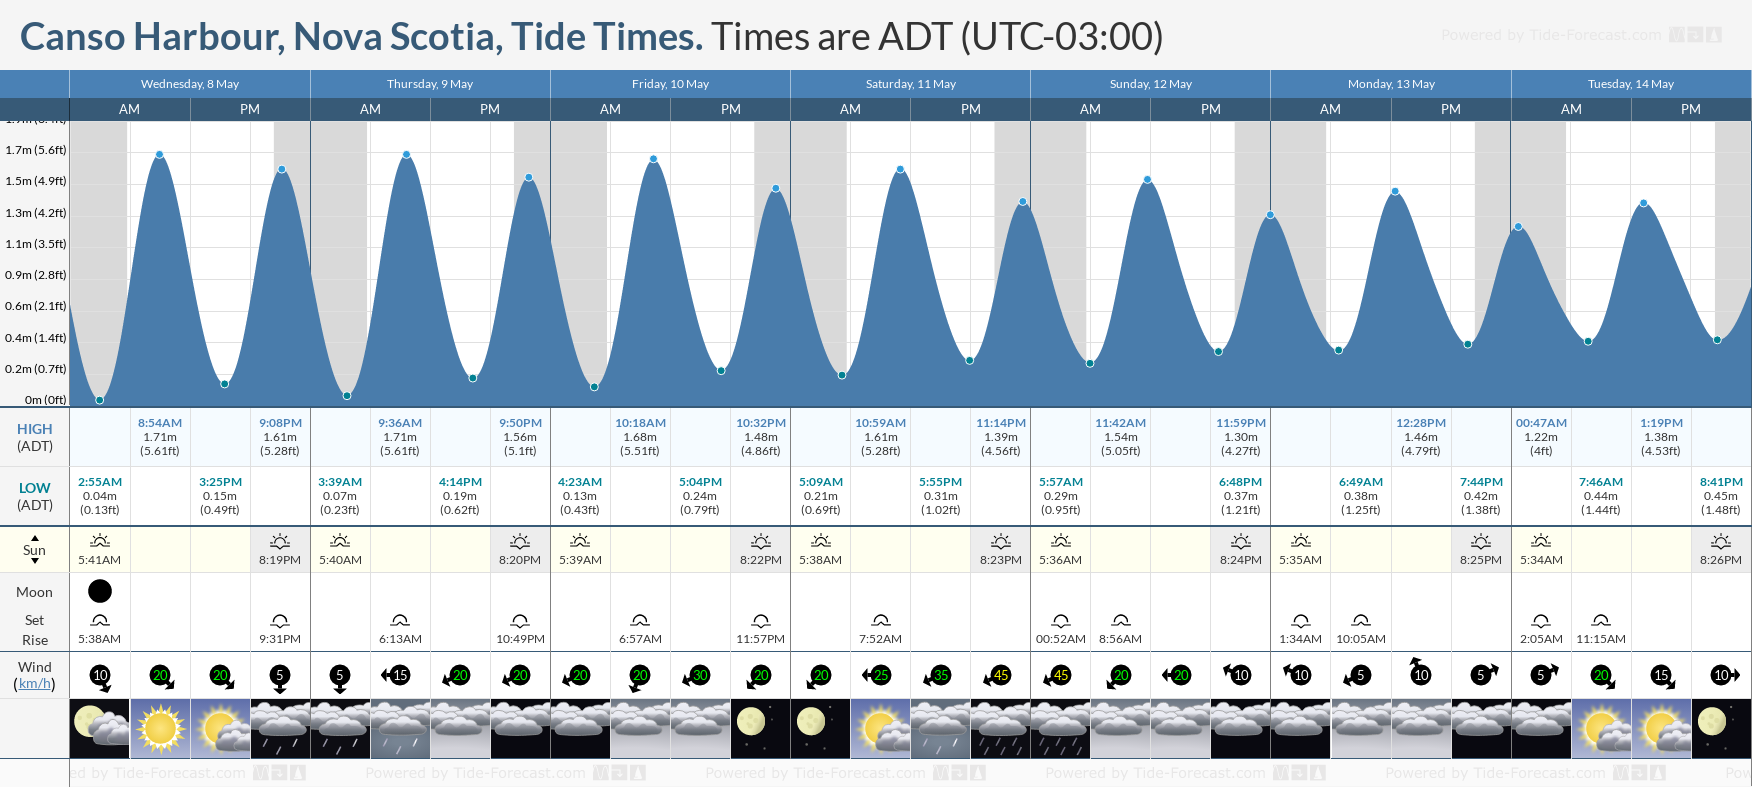 Canso Harbour, Nova Scotia Tide Chart including high and low tide tide times for the next 7 days